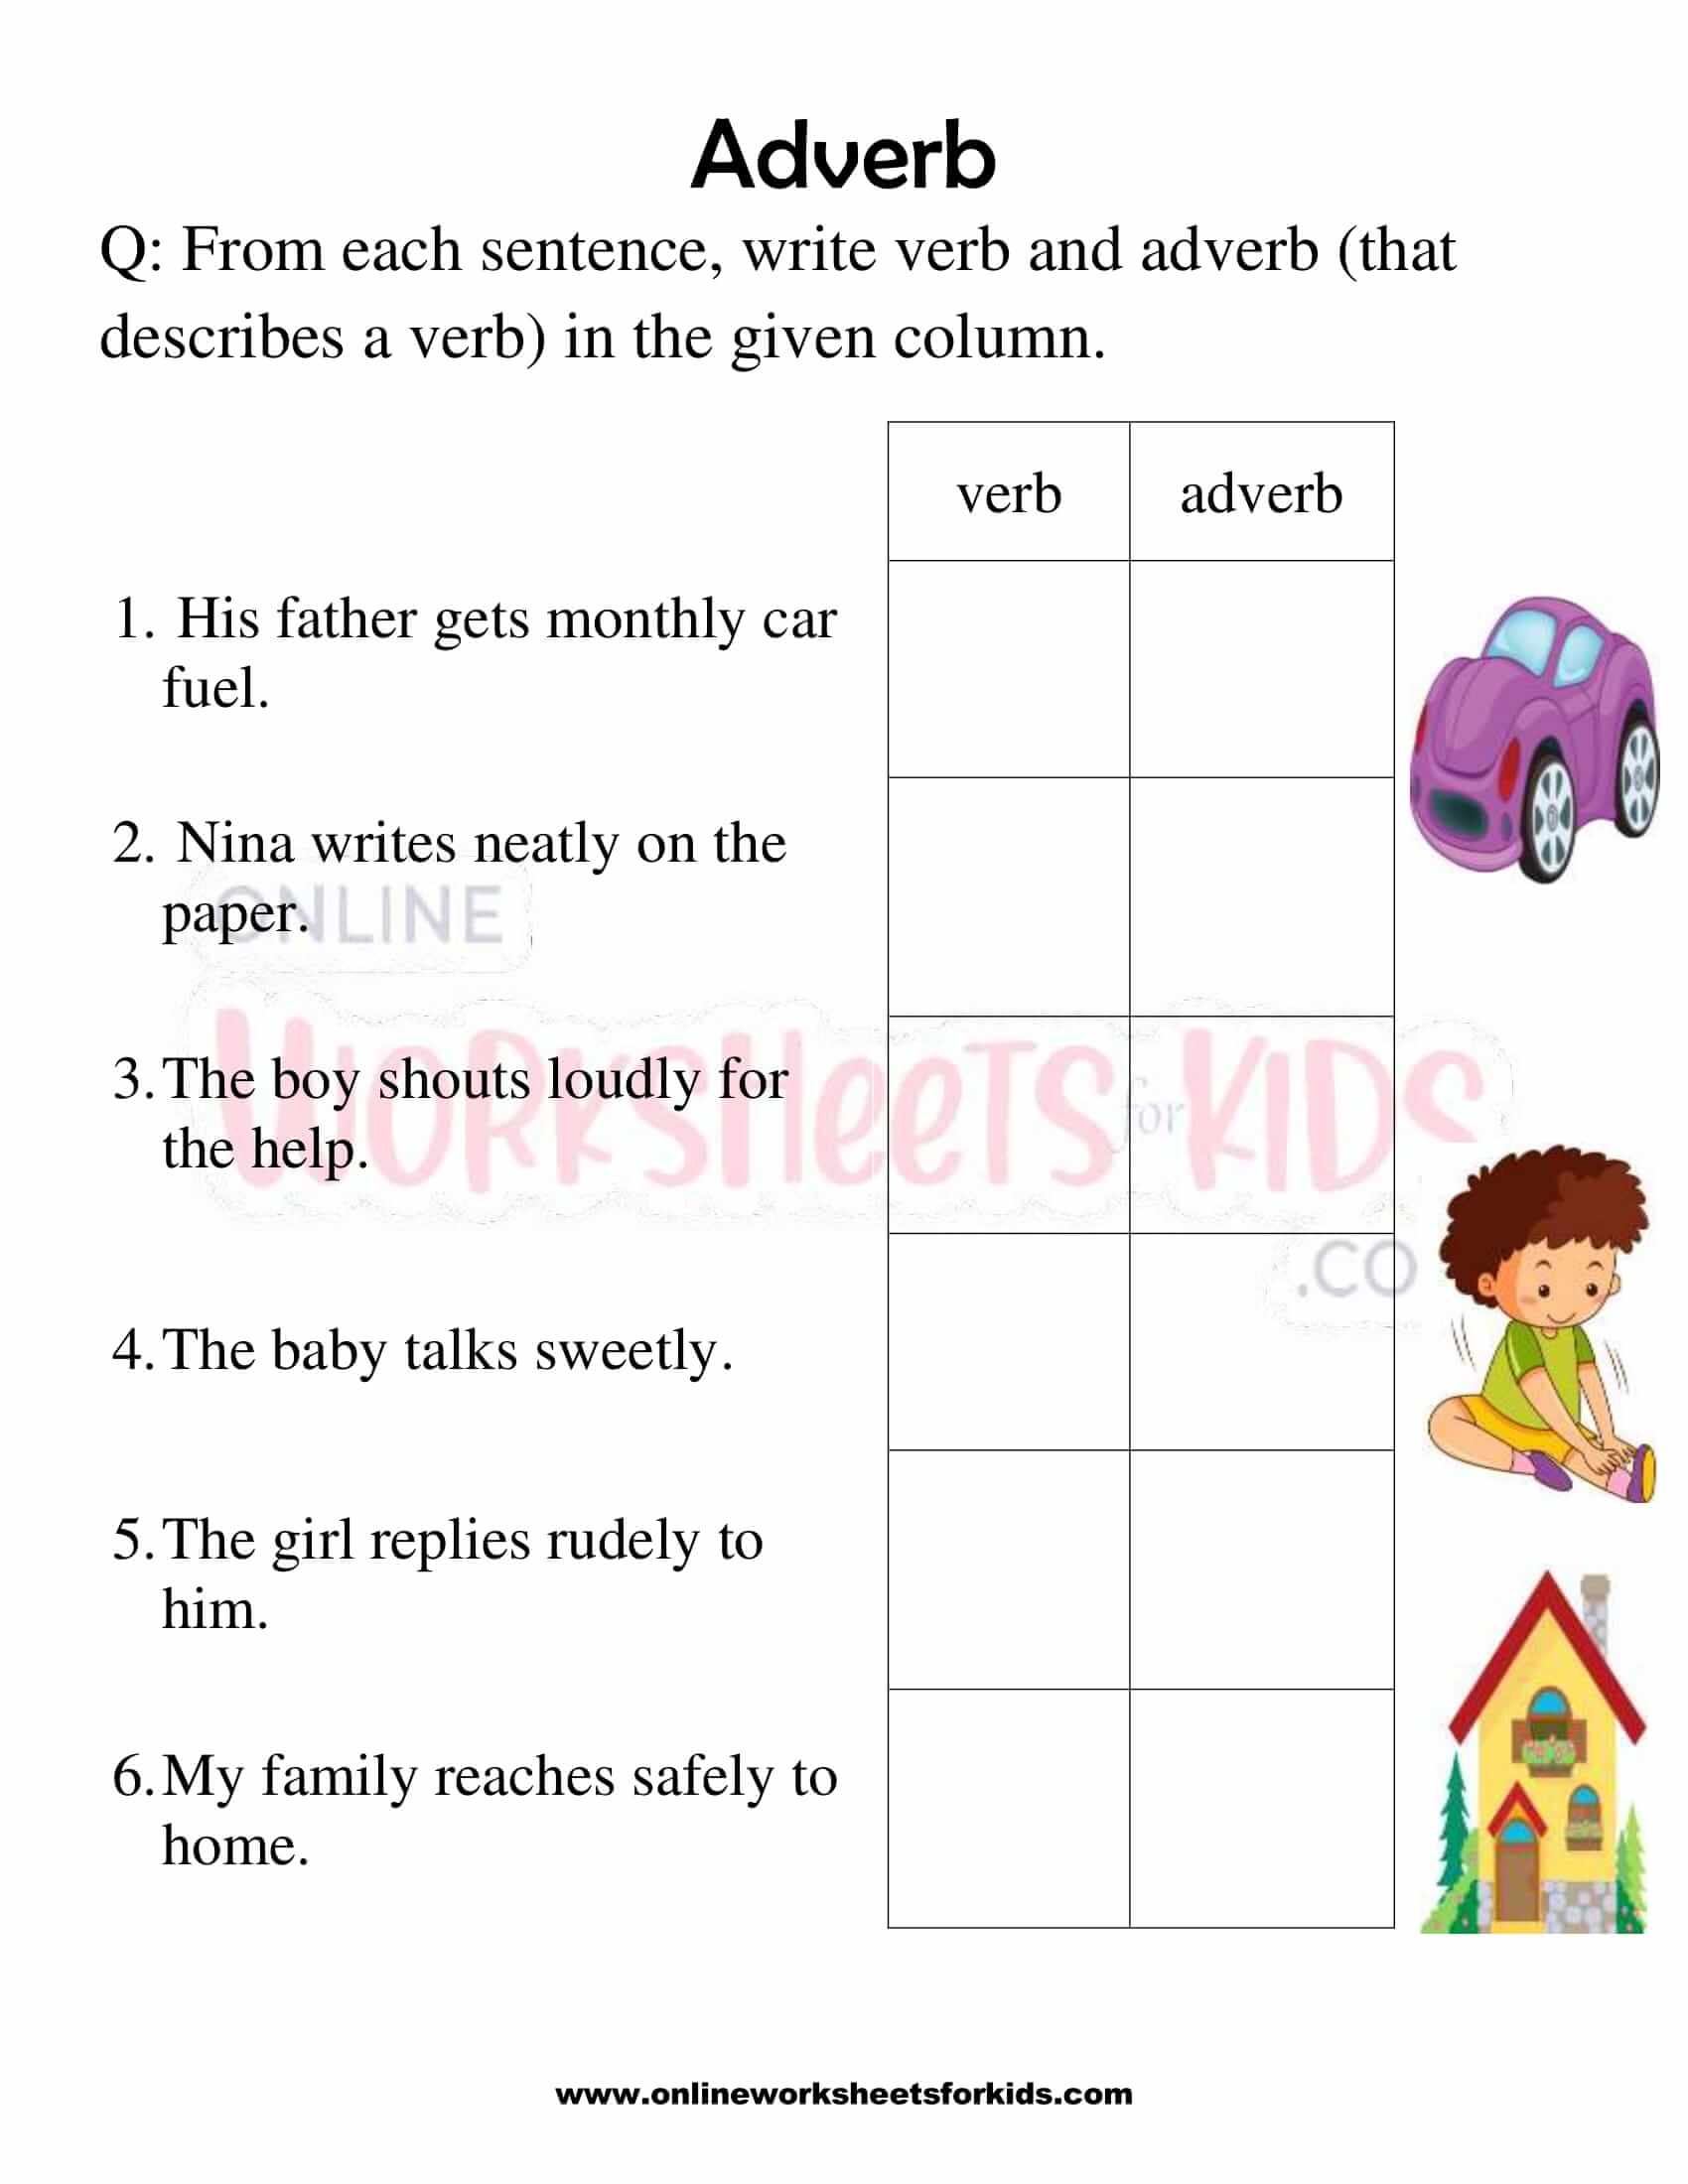 Adverb Live Worksheet For Class 7